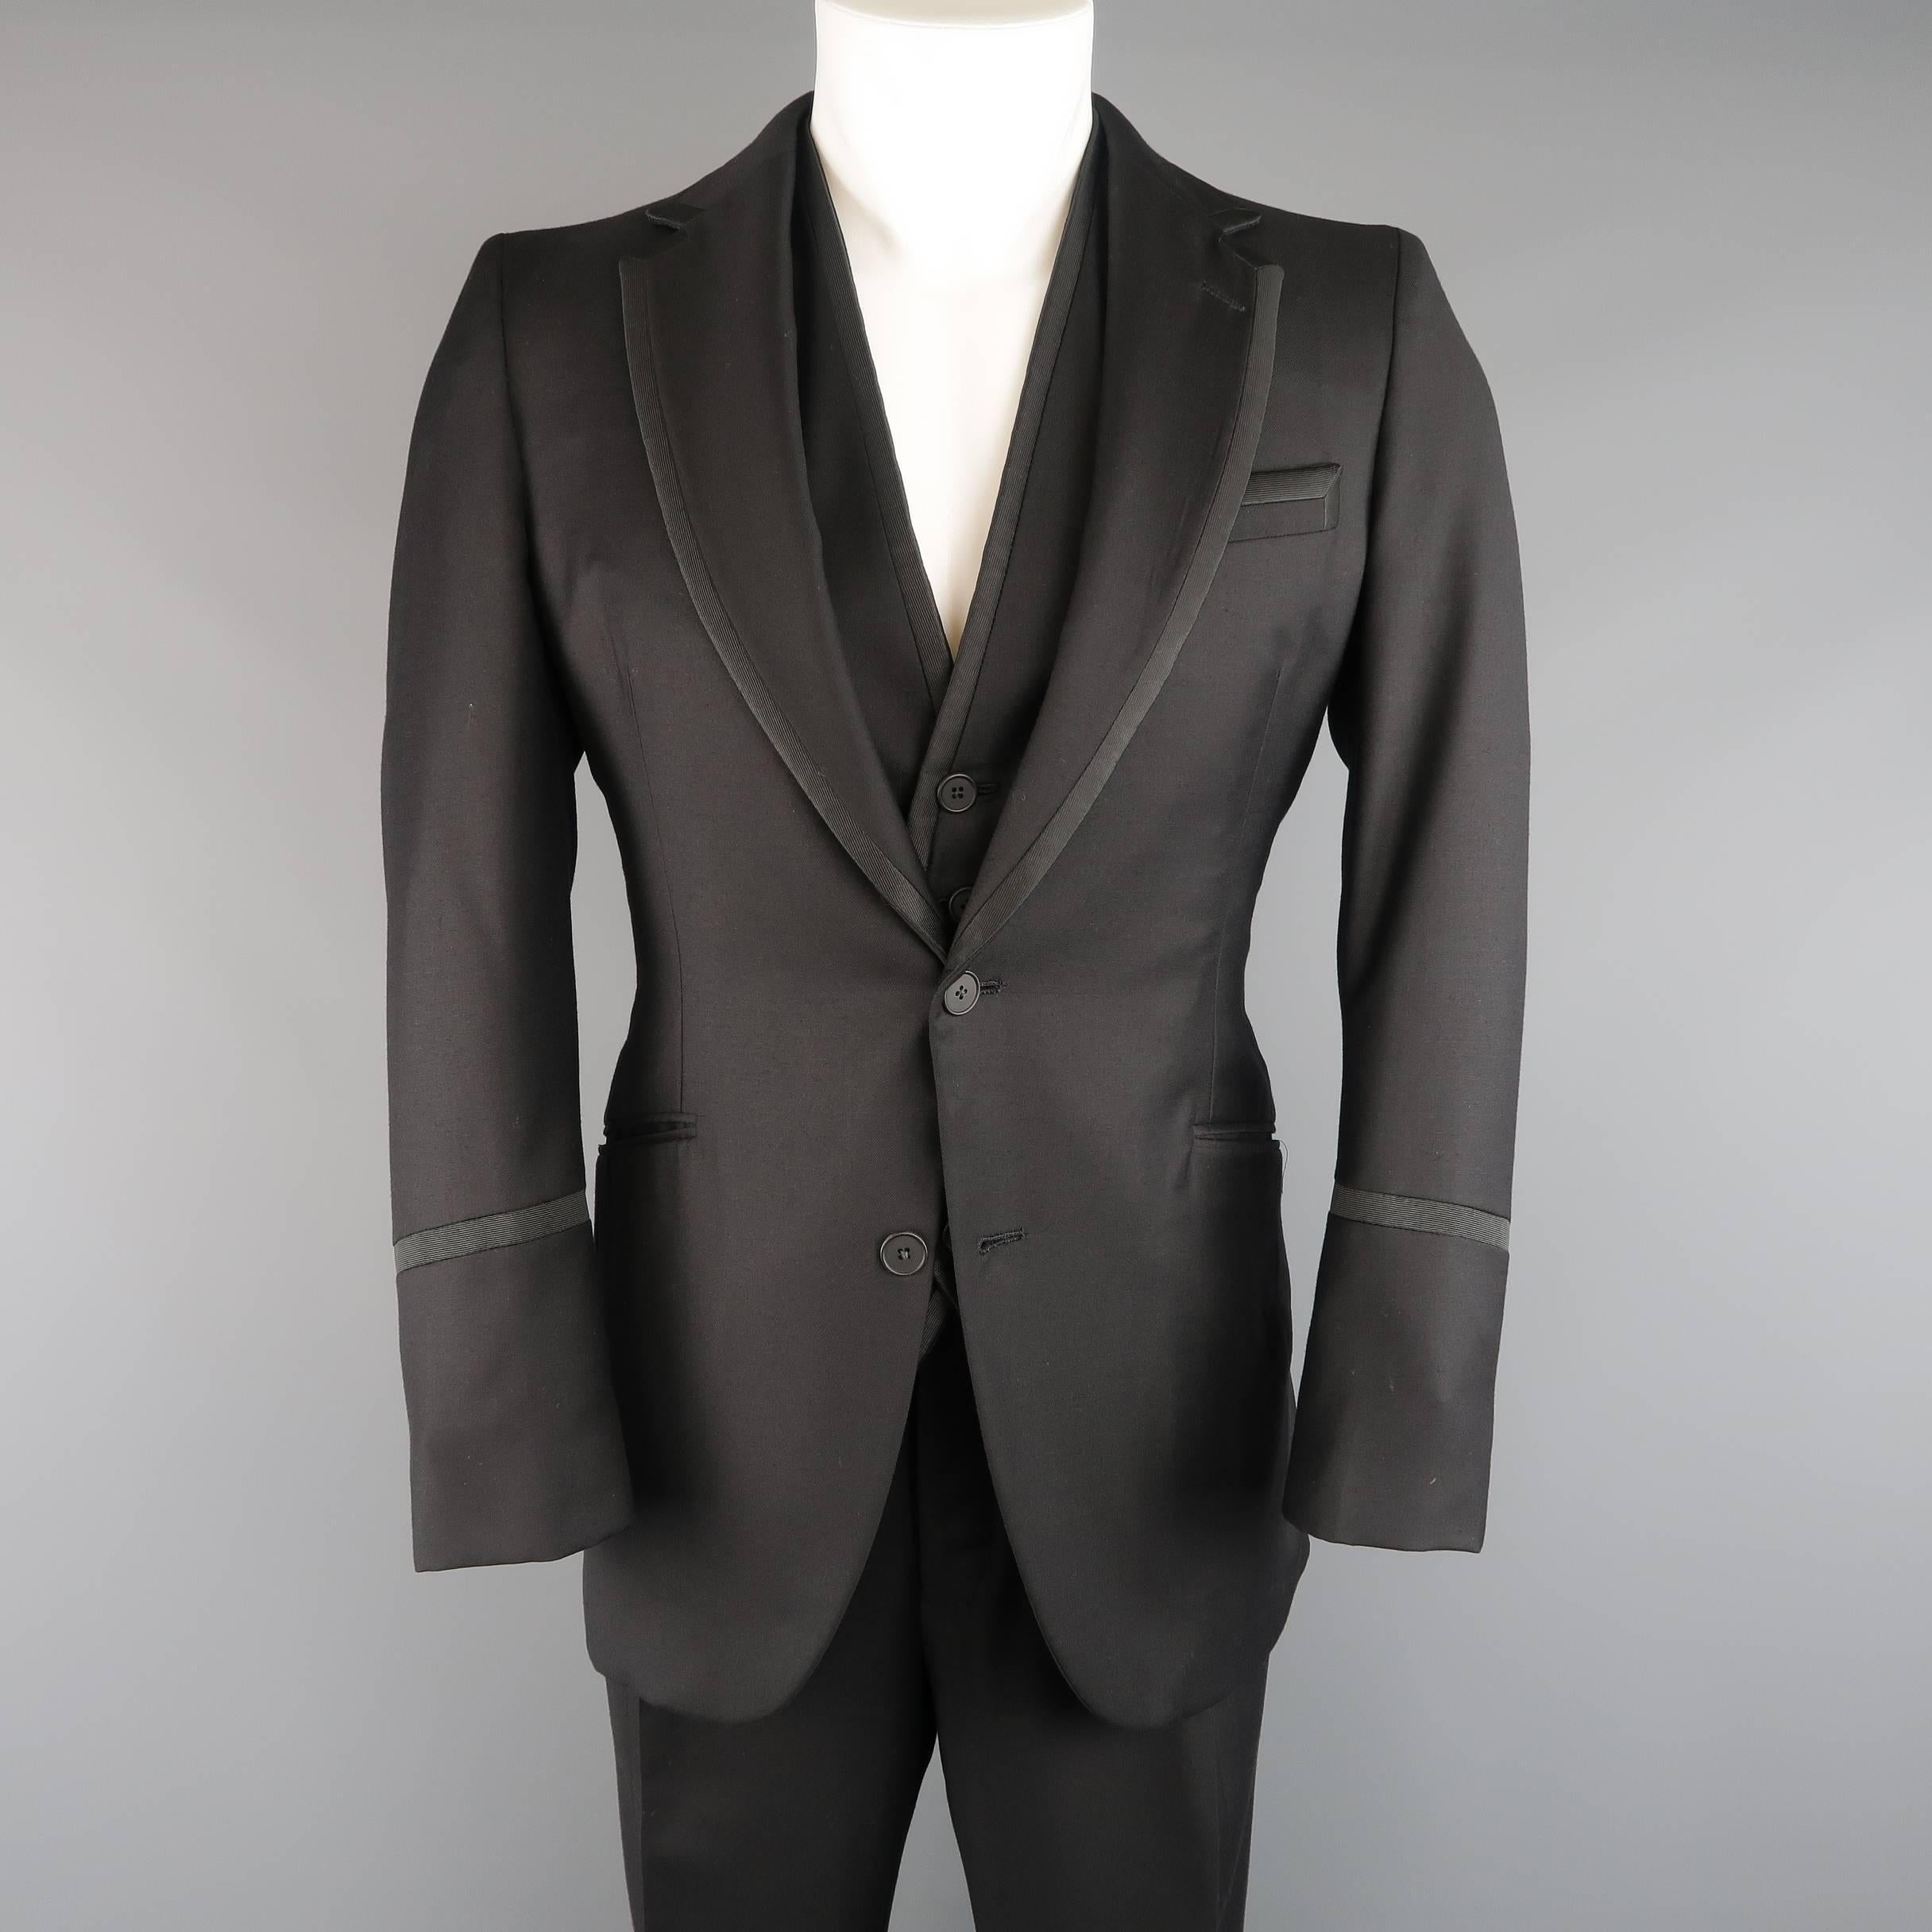 BOTTEGA VENETA three piece tuxedo suit comes in black wool twill with satin faille piping and includes a two button, notch lapel sport coat, v neck vest, and matching single pleat trousers. Made in Italy.
 
Good Pre-Owned Condition.
Marked: IT 50
